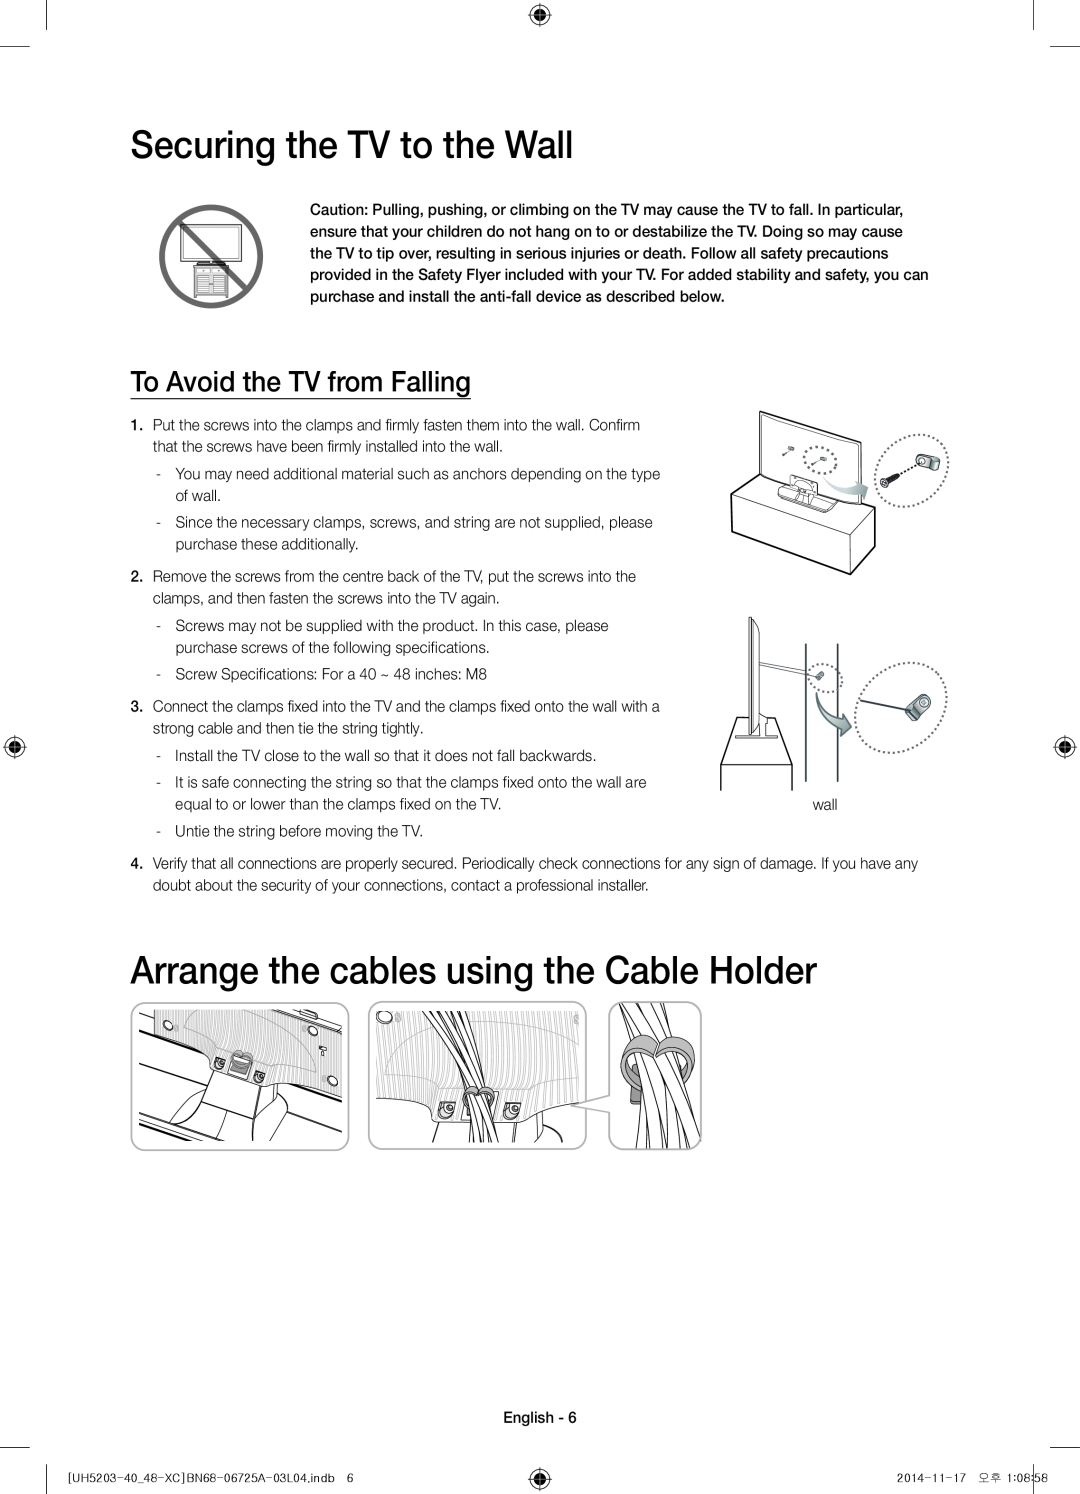 Samsung UE40H5203AWXXC, UE48H5203AWXXC manual Securing the TV to the Wall, Arrange the cables using the Cable Holder 